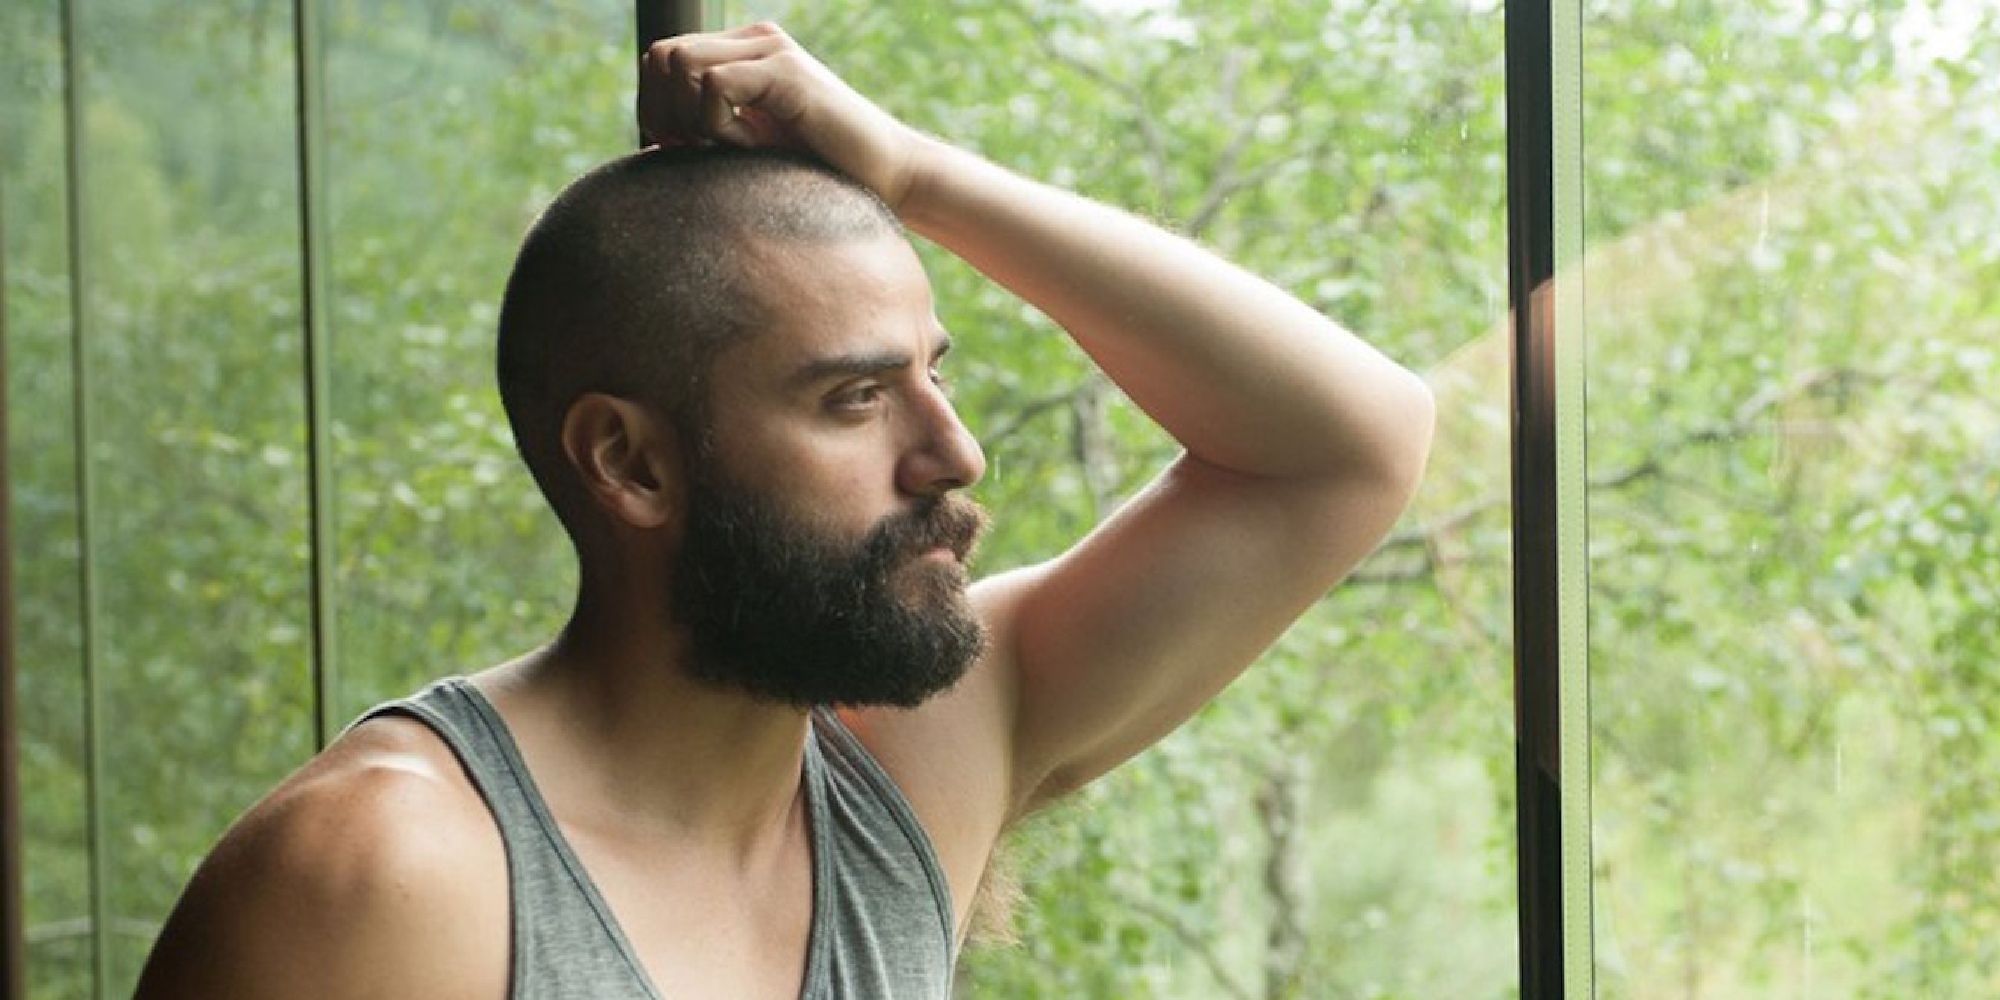 Oscar Isaac leaning against a window in 'Ex Machina' (2014)